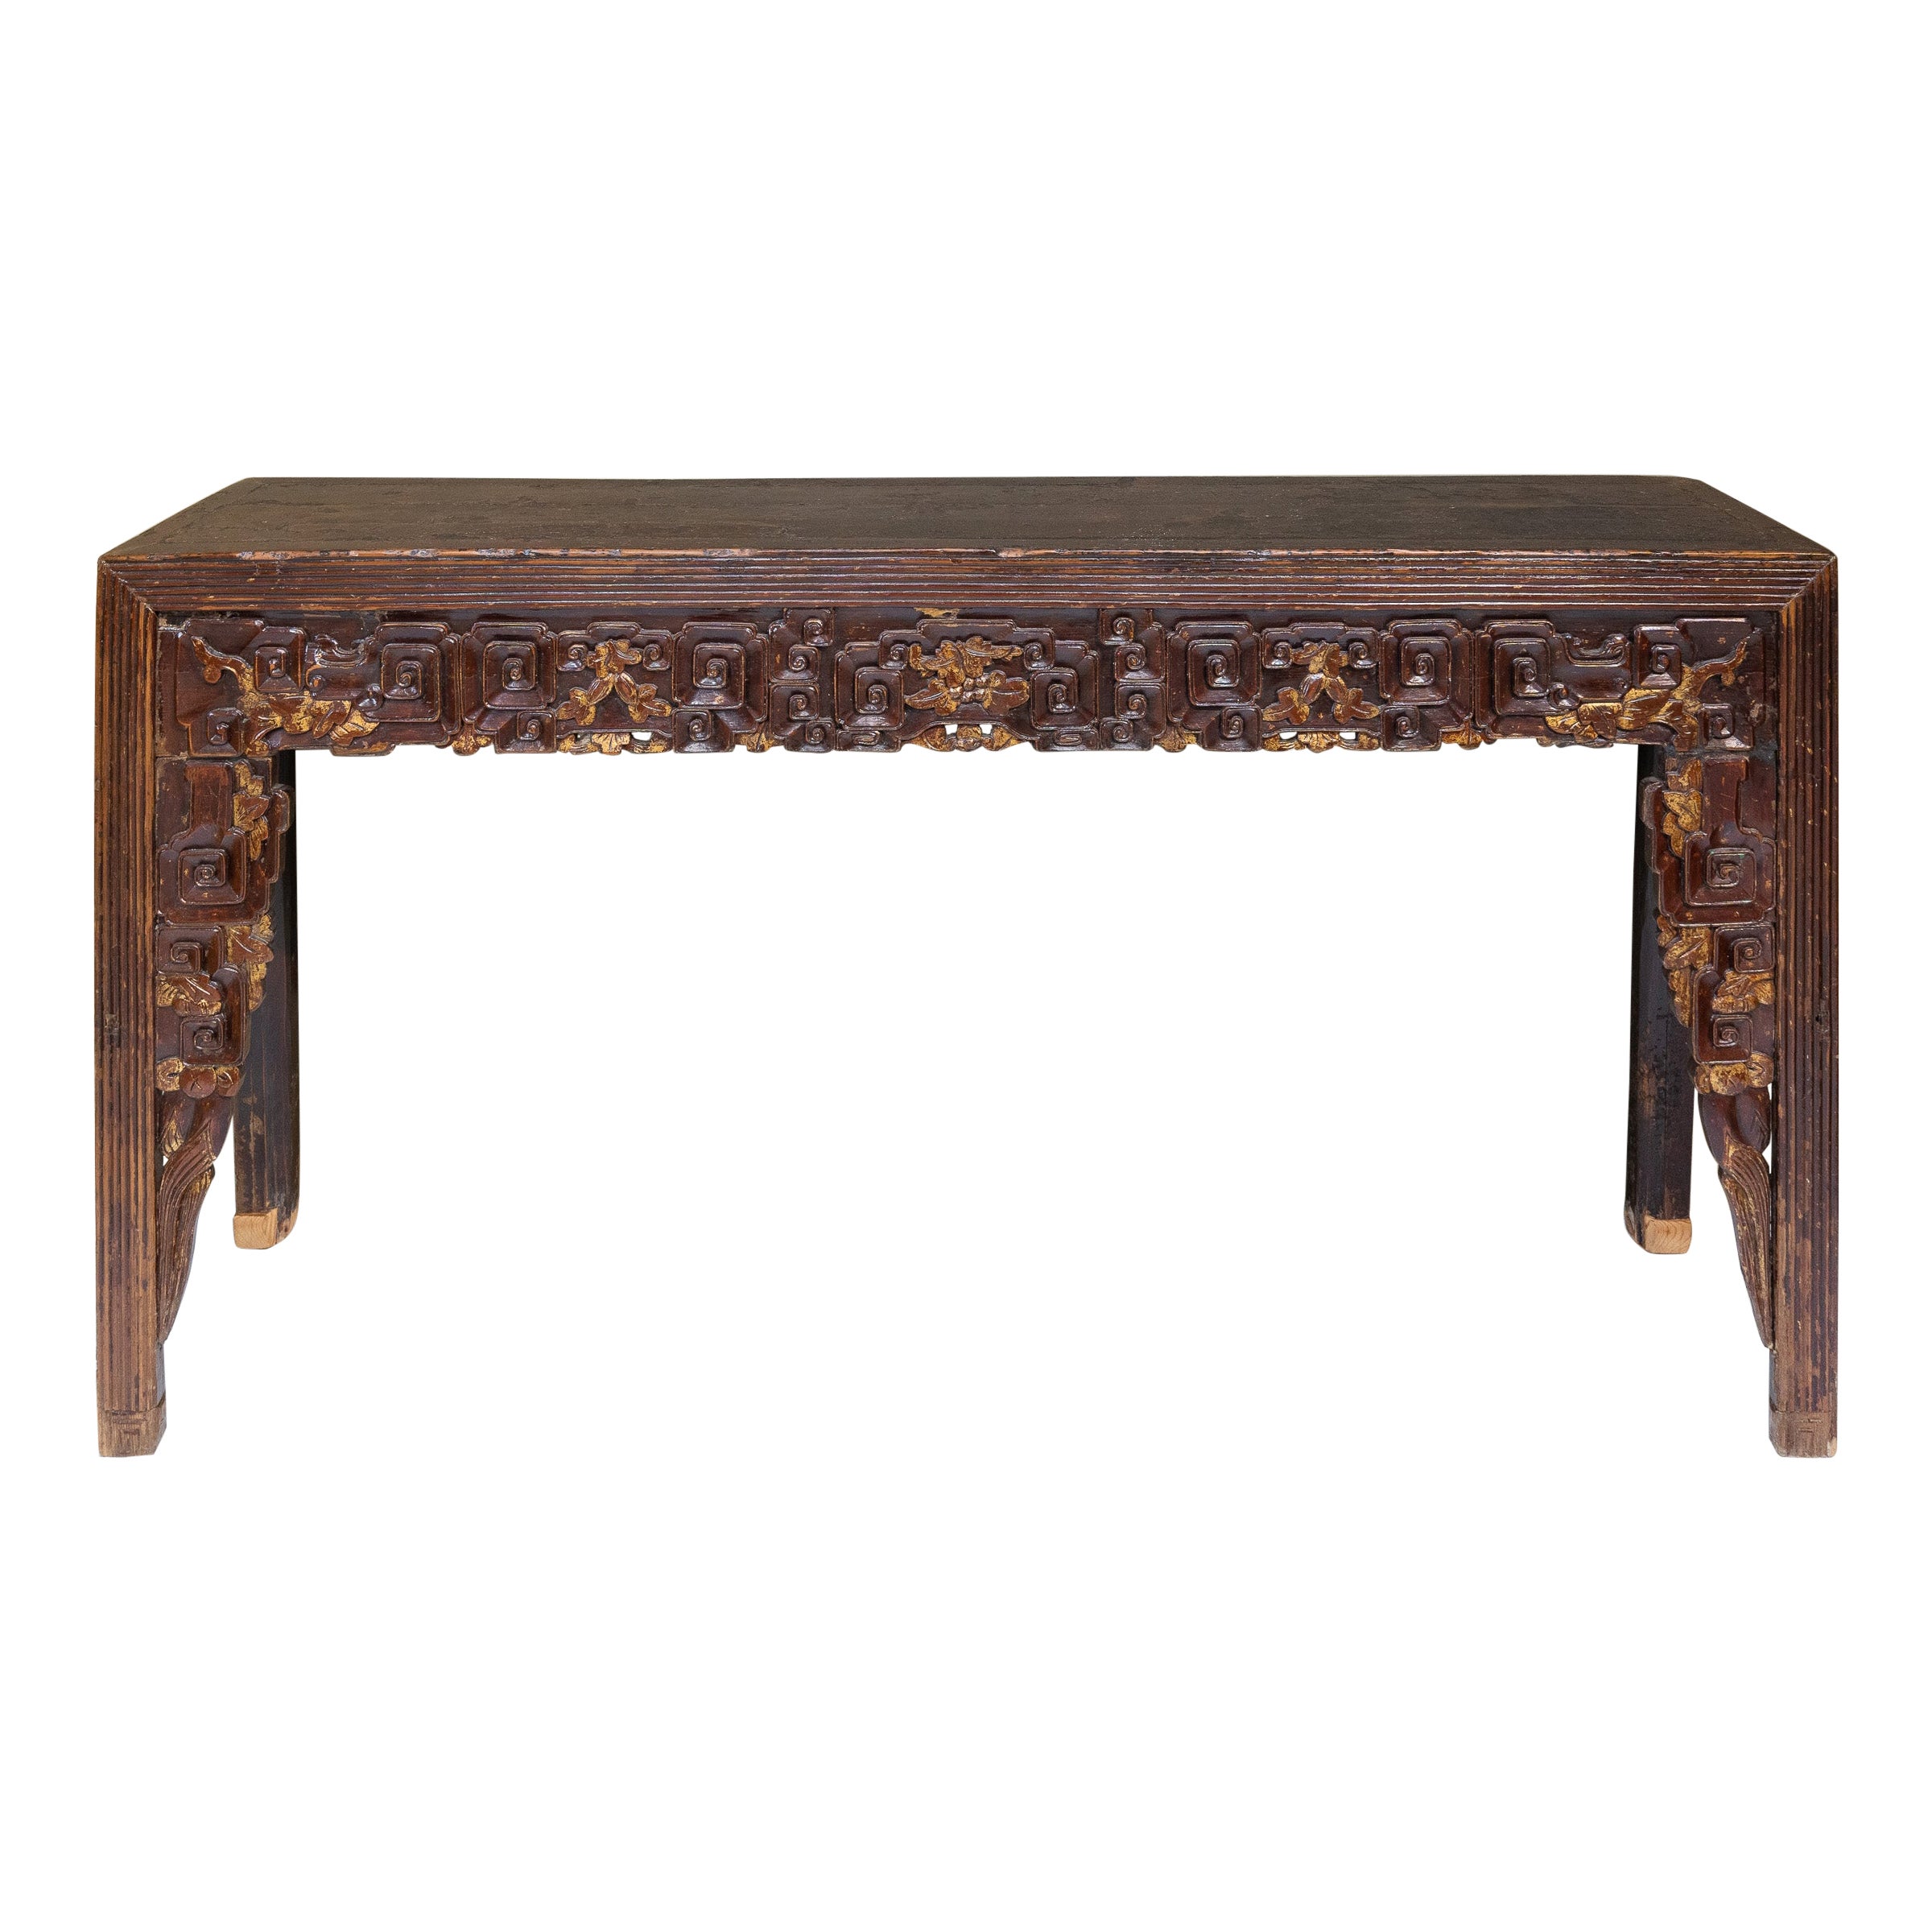 Early Republic Carved Altar Table from Chaozhou, China